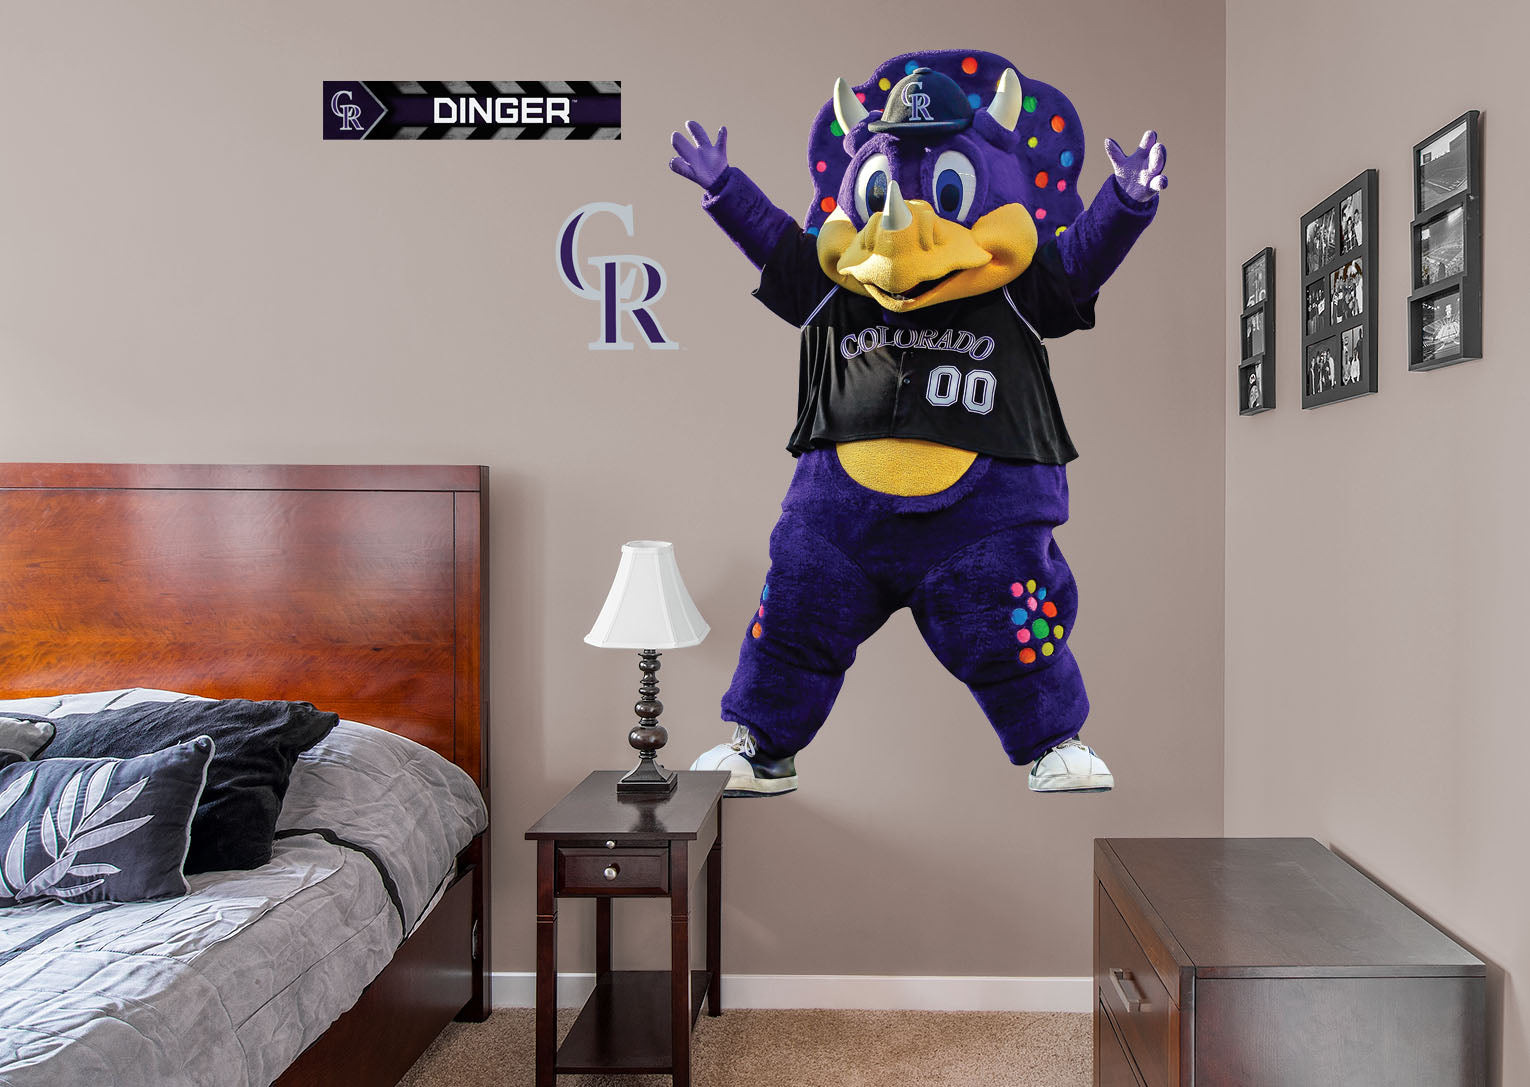 Colorado Rockies: Dinger 2021 Mascot - Officially Licensed MLB